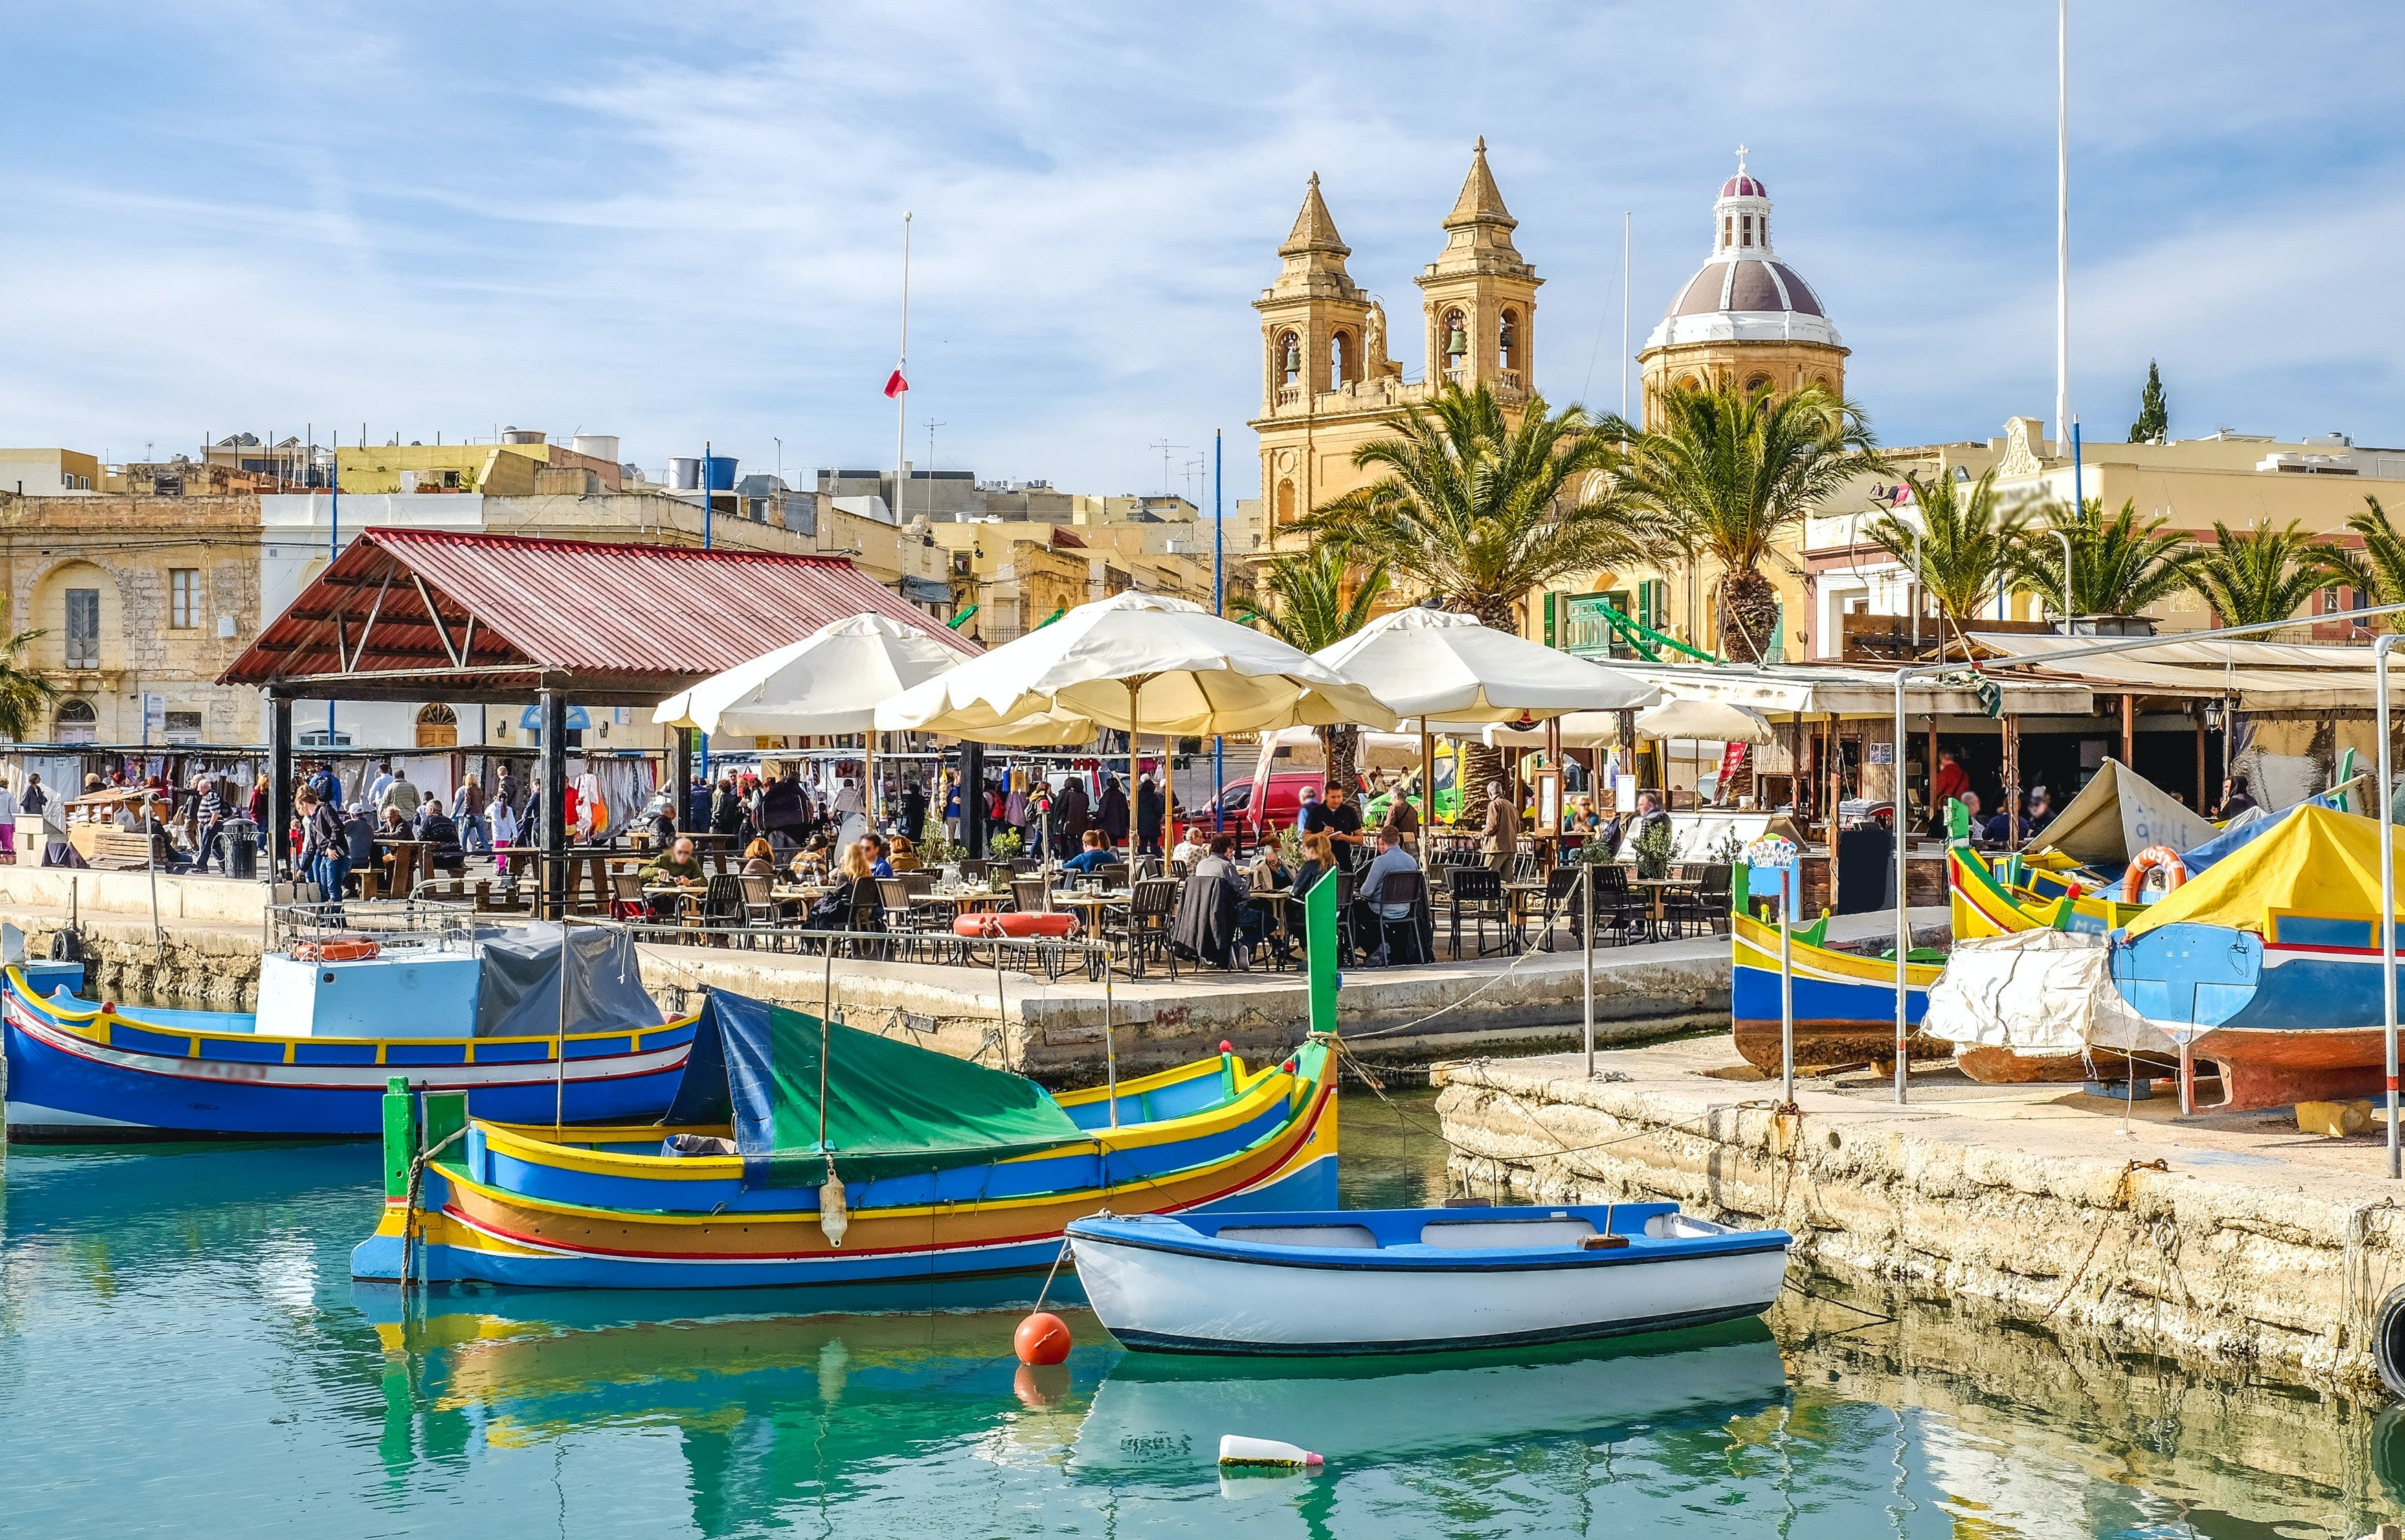 Malta Update: It's Official, President Signs Cannabis Legalization Bill Into Law